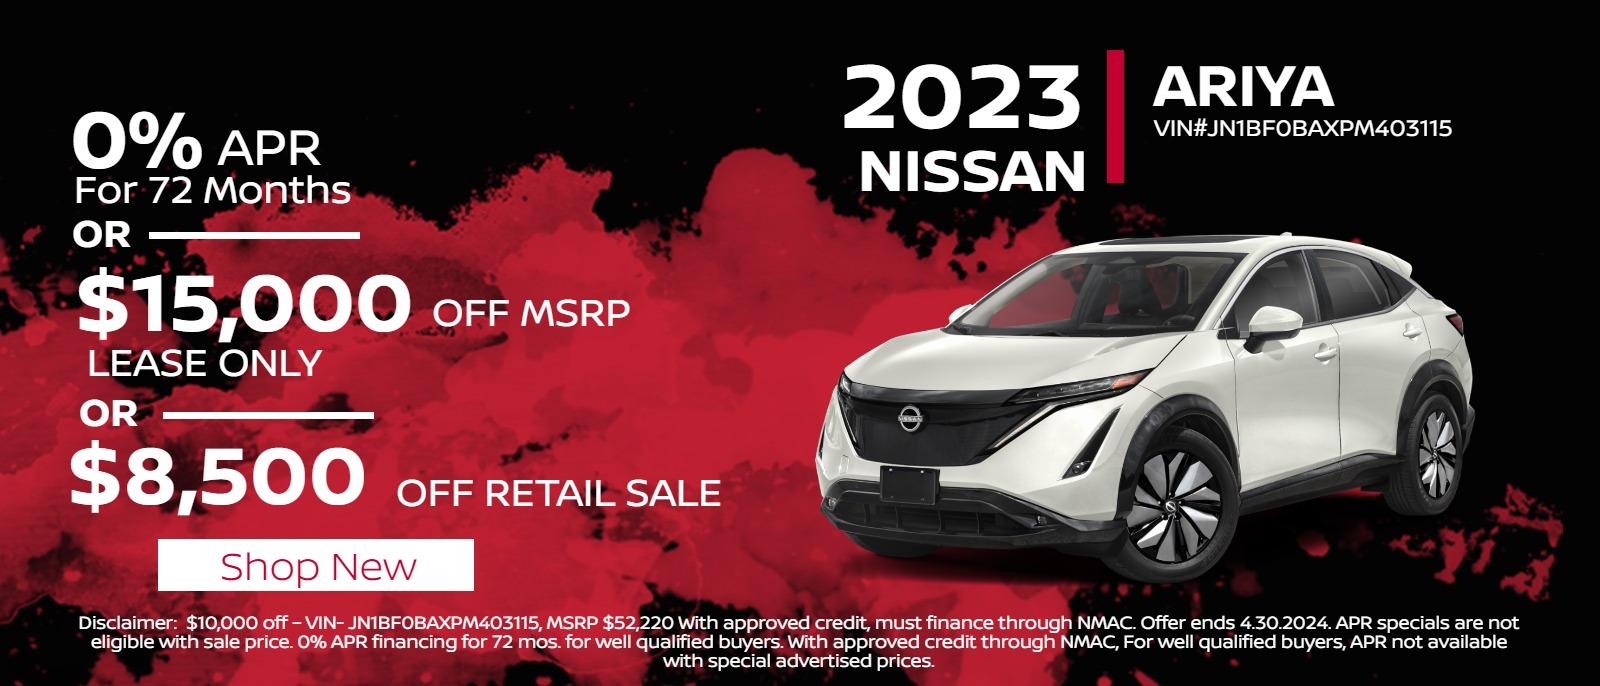 2023 Ariya
 0% APR for 72 months 
or 
$15,000 off MSRP 
Lease only 
or 
$$8,500 off retail sale